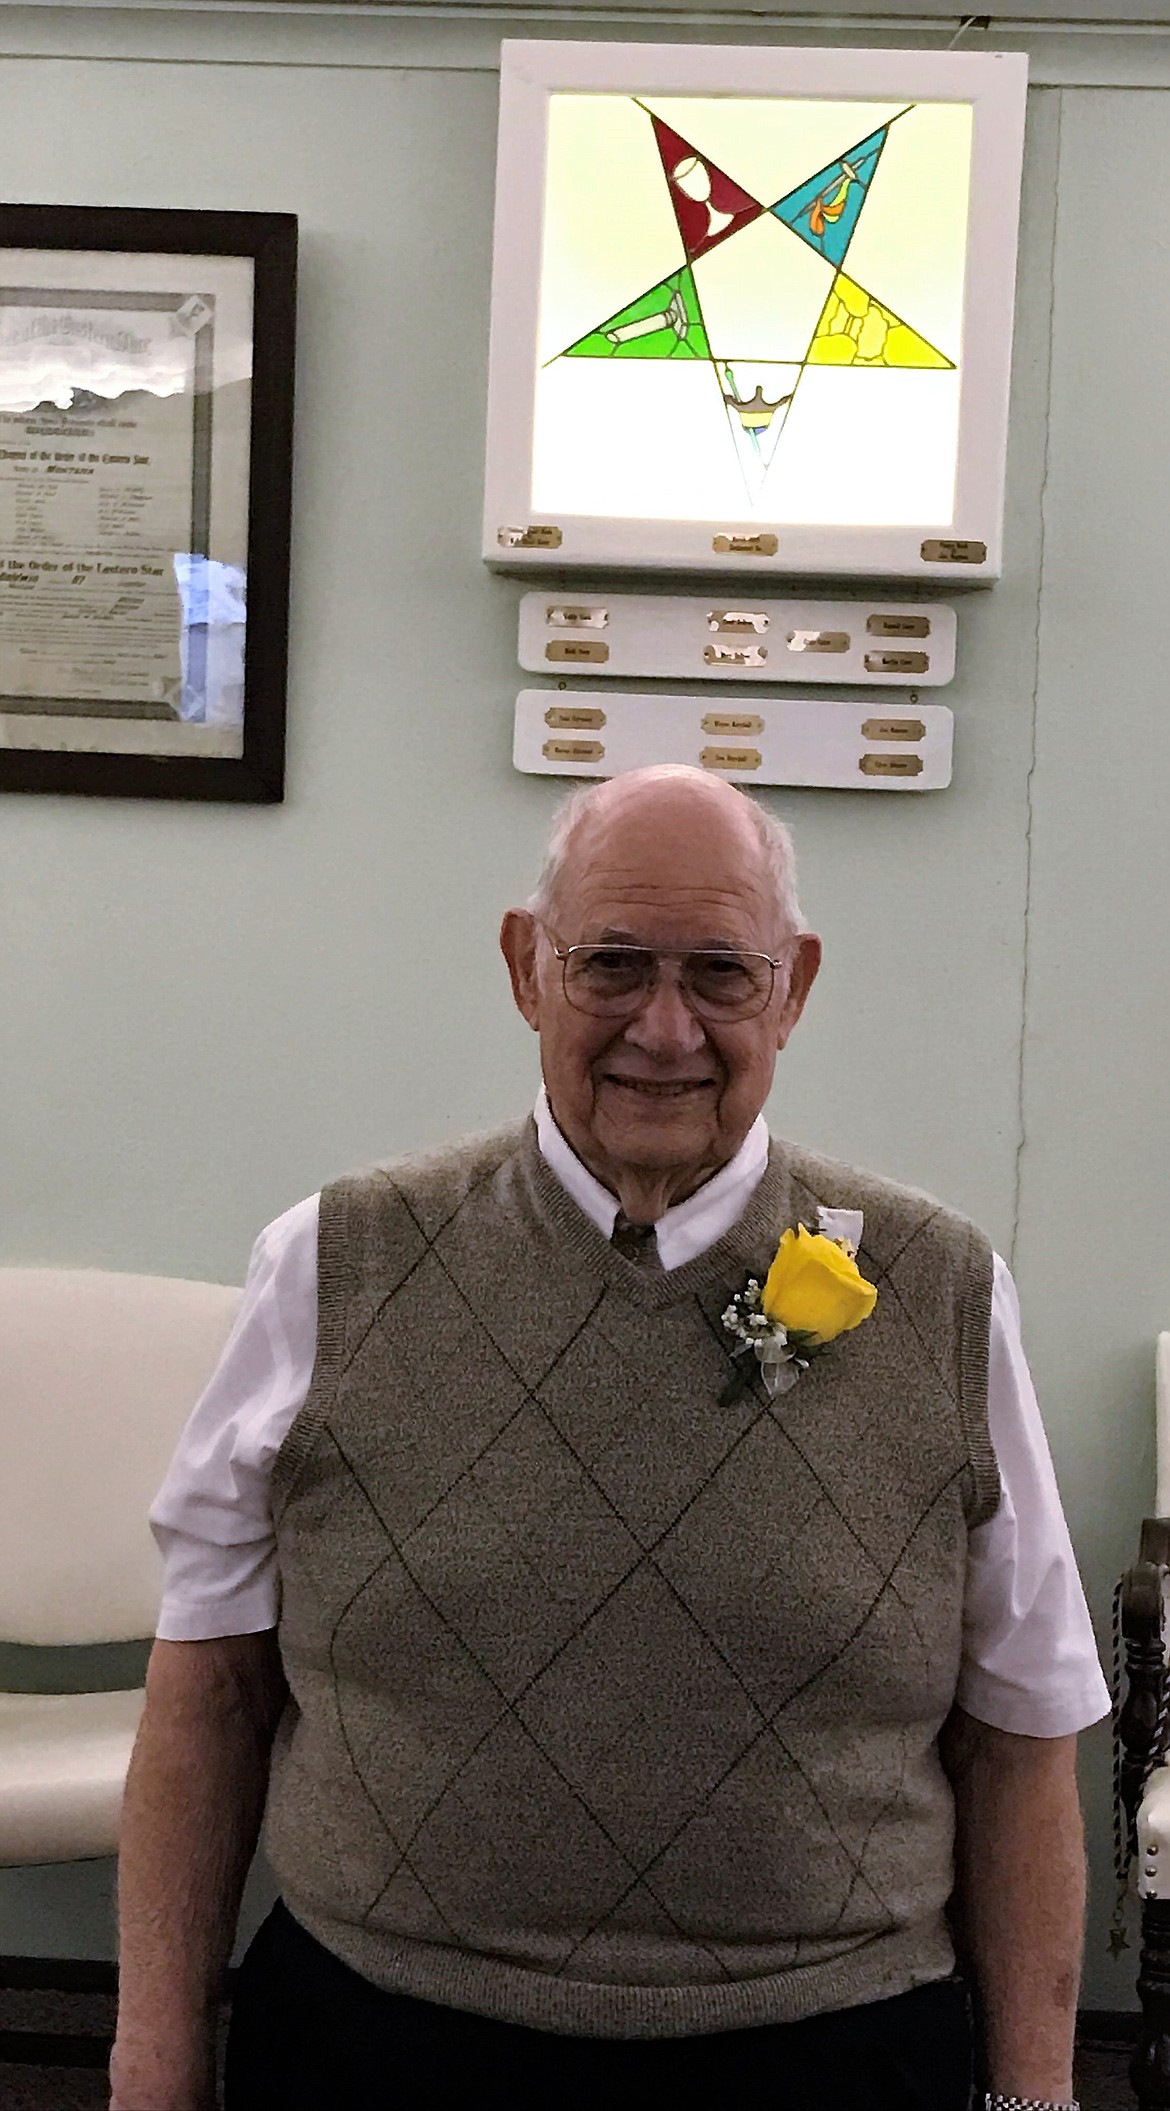 Jim DeBree and his wife Shirley were honored on Mar. 28 with a 50-year Membership pin for Service from the Order of the Eastern Star. Shirley was unable to attend the ceremony. (Photo courtesy of Elaine Robinson).